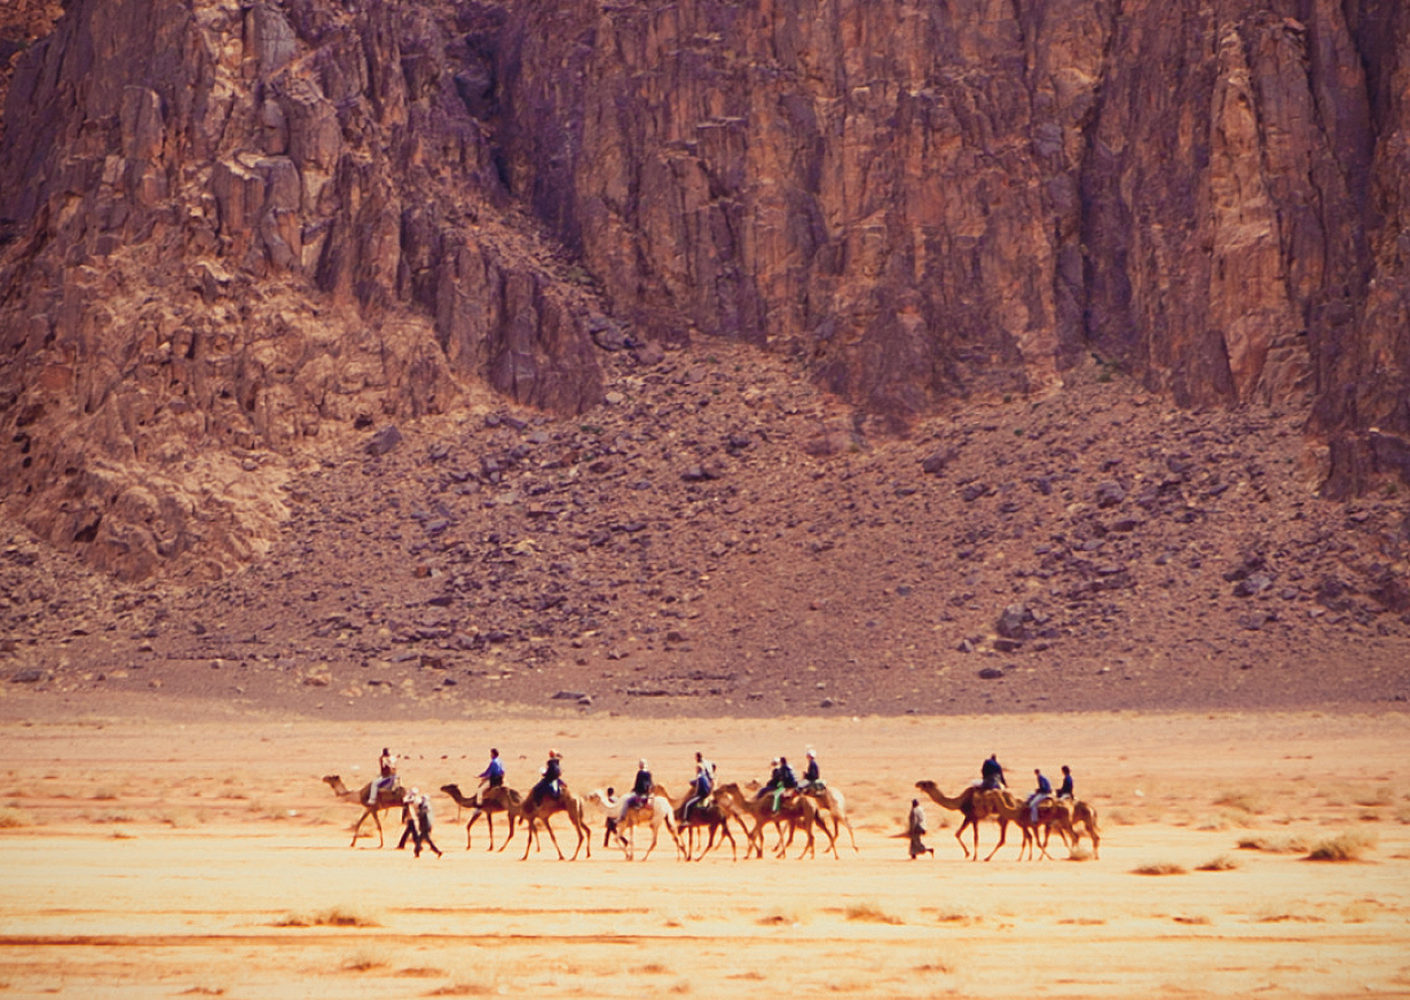 A line of camels with riders walking across the desert in Jordan with a brown craggy rock face backdrop